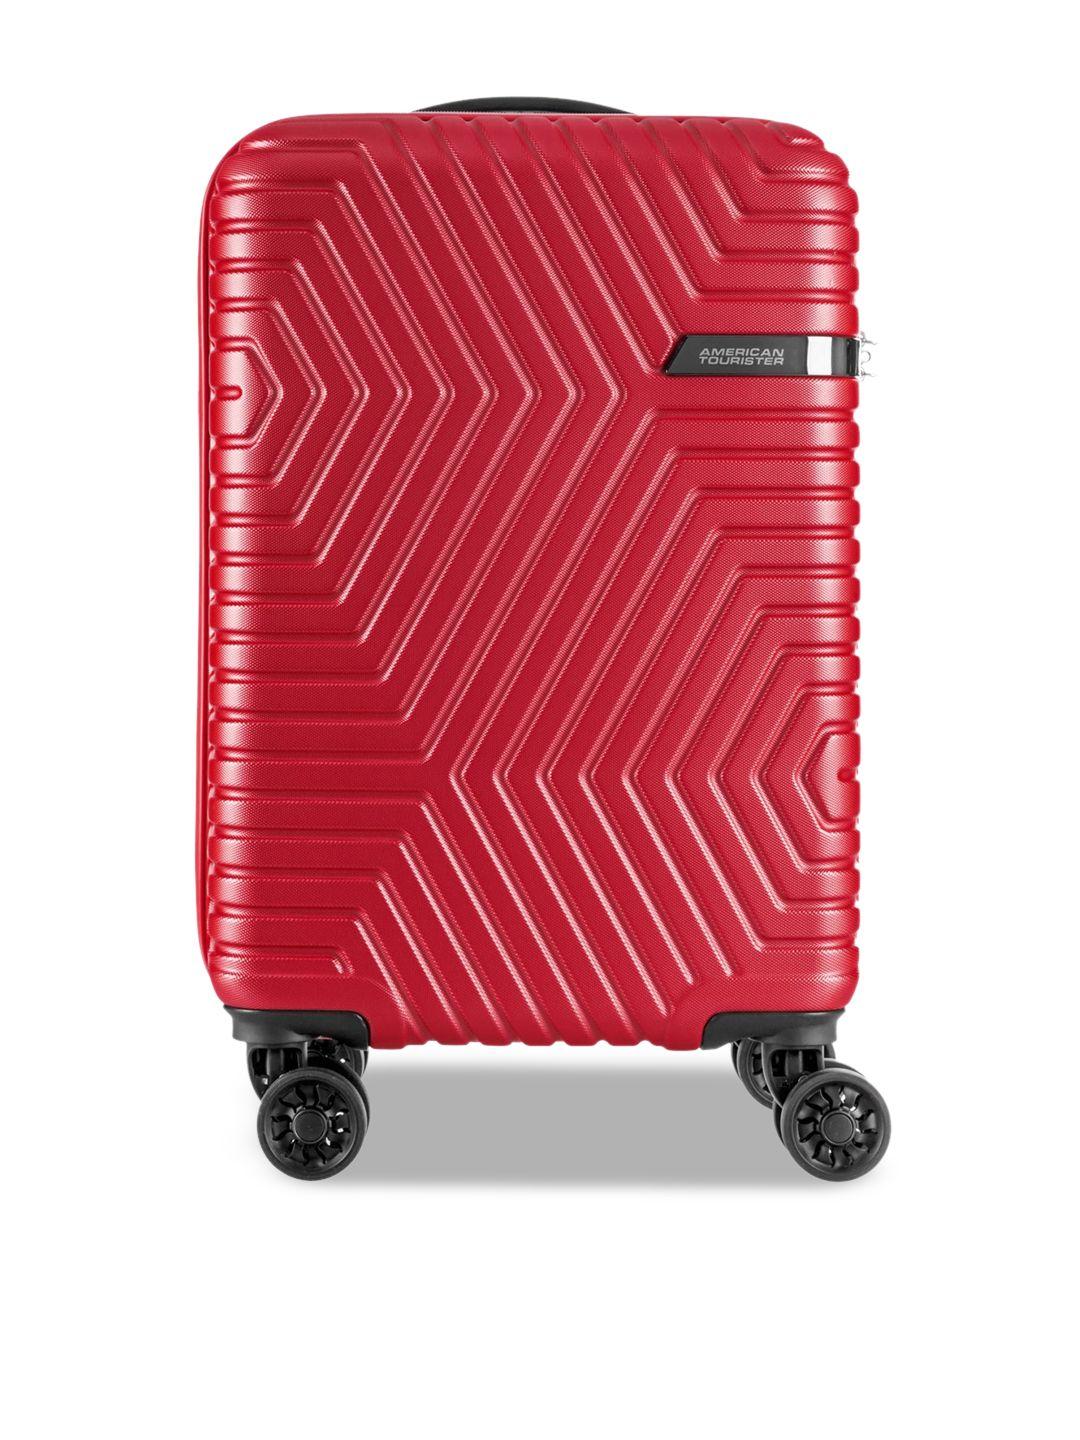 american-tourister-unisex-red-textured-soft-sided-trolley-suitcase